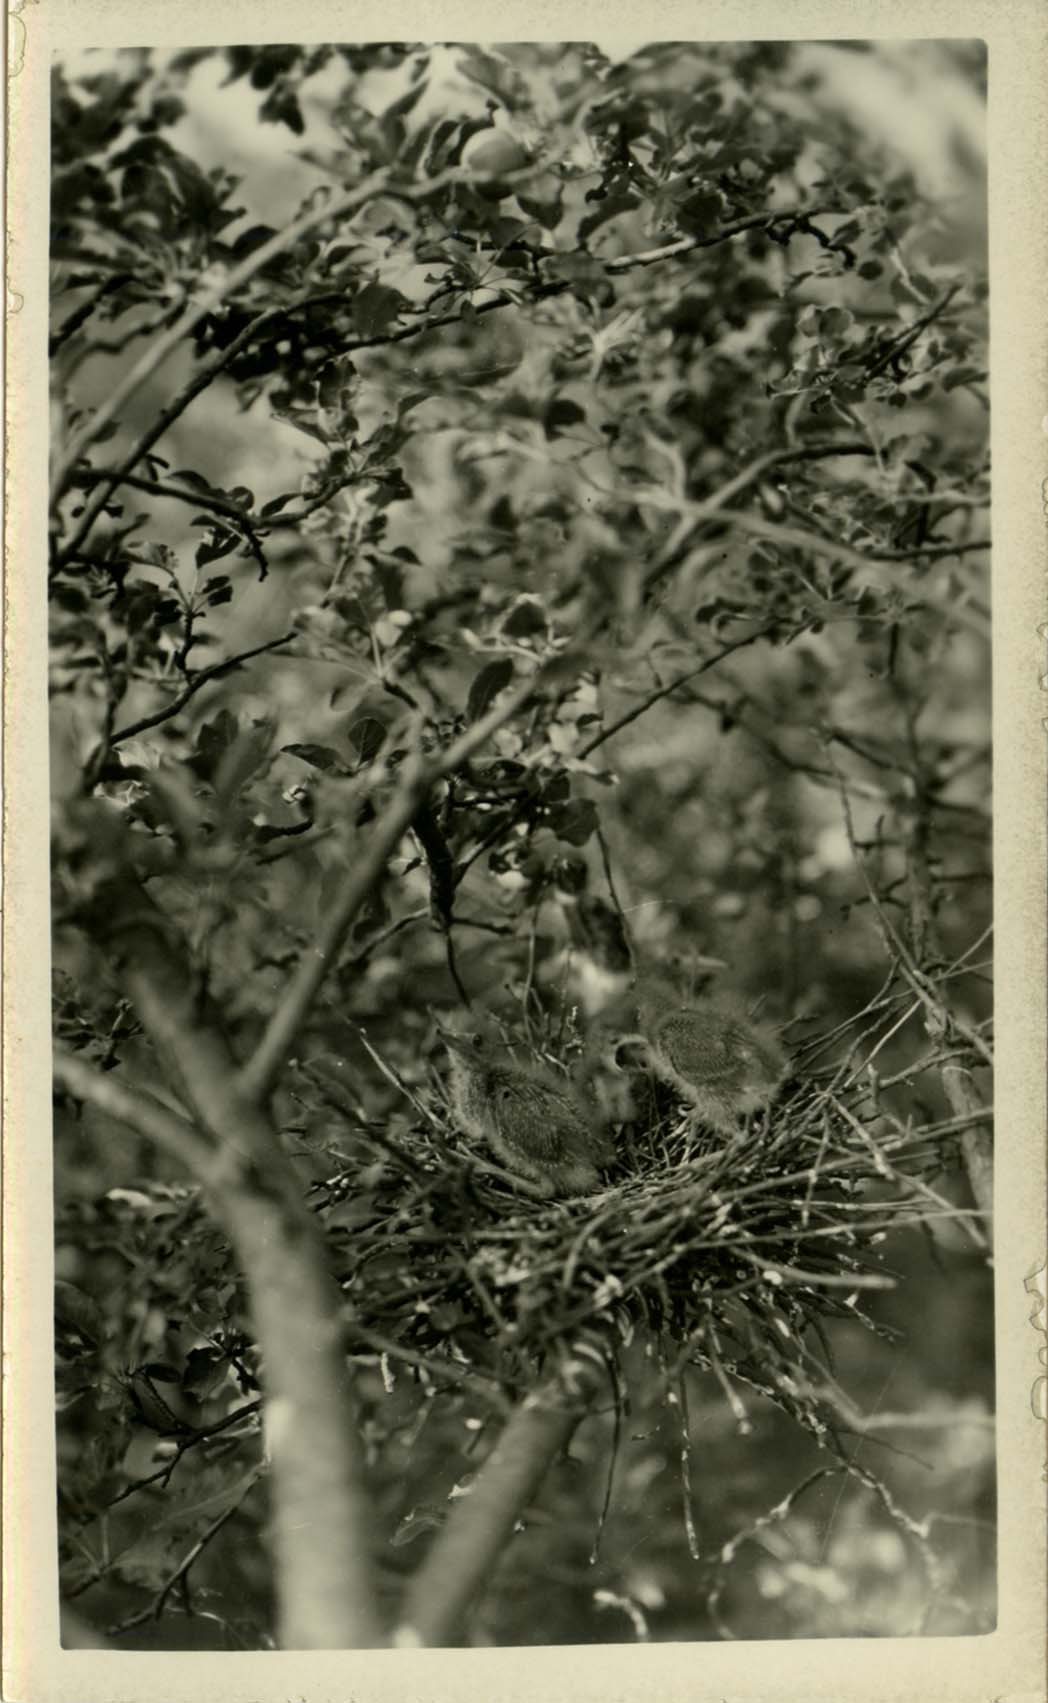 Photograph of young Green Herons in a nest